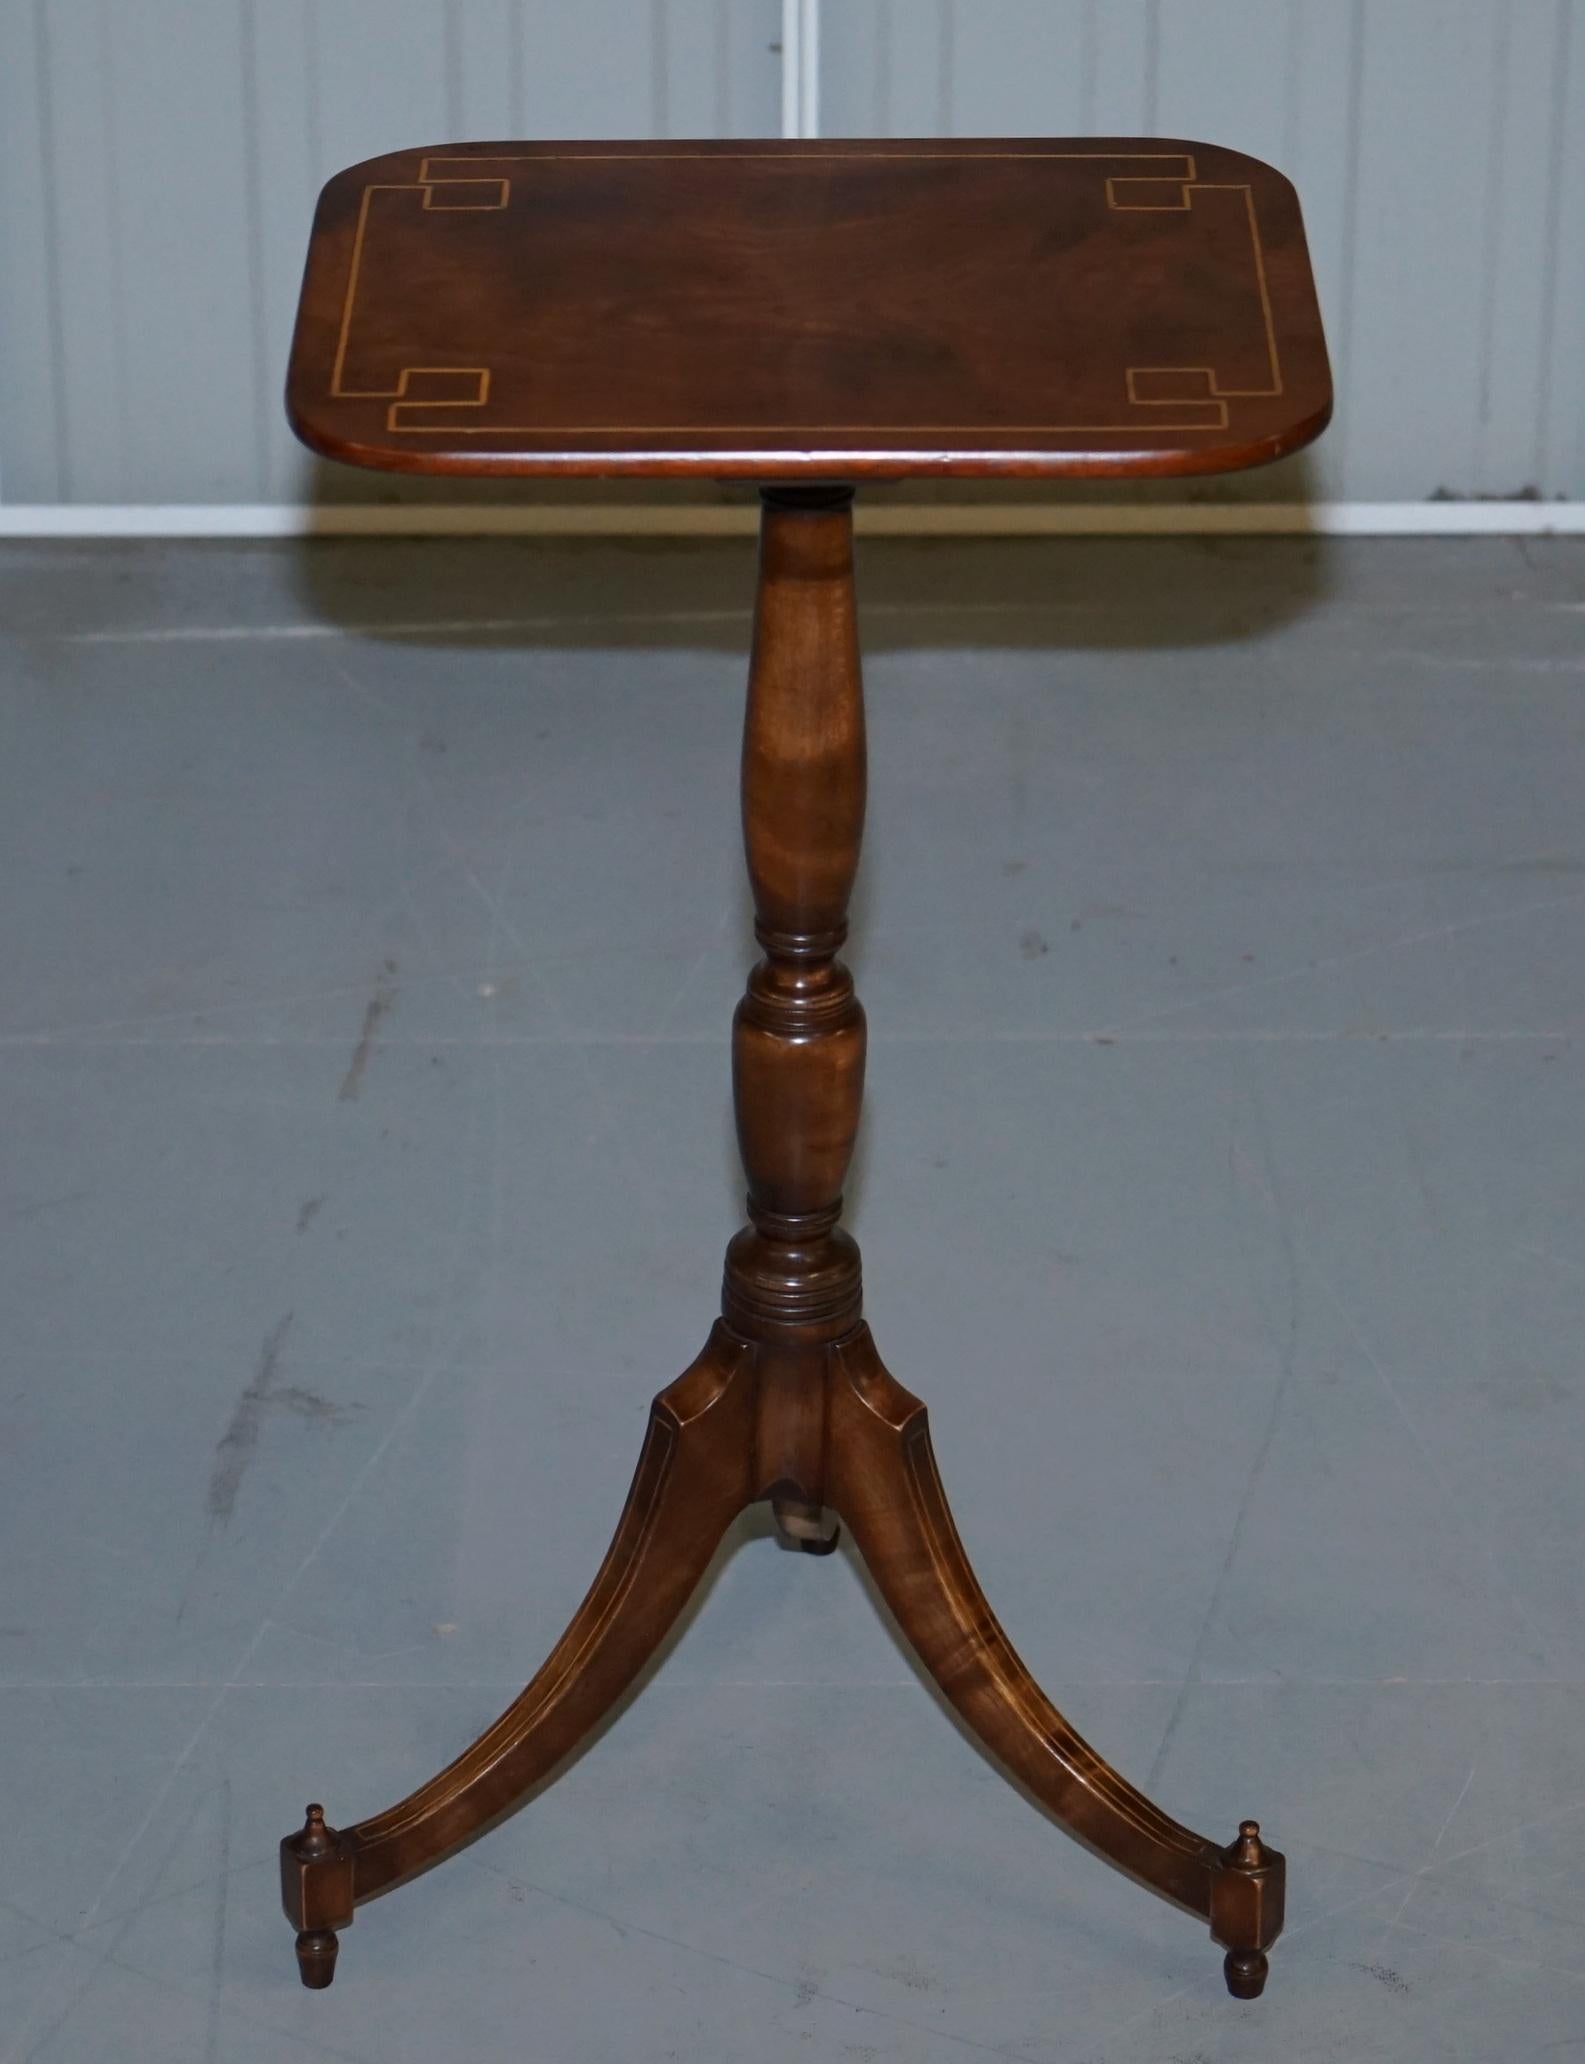 Hand-Crafted Pair of Antique Flamed Walnut & Inlaid Regency Style Tripod Side End Lamp Tables For Sale